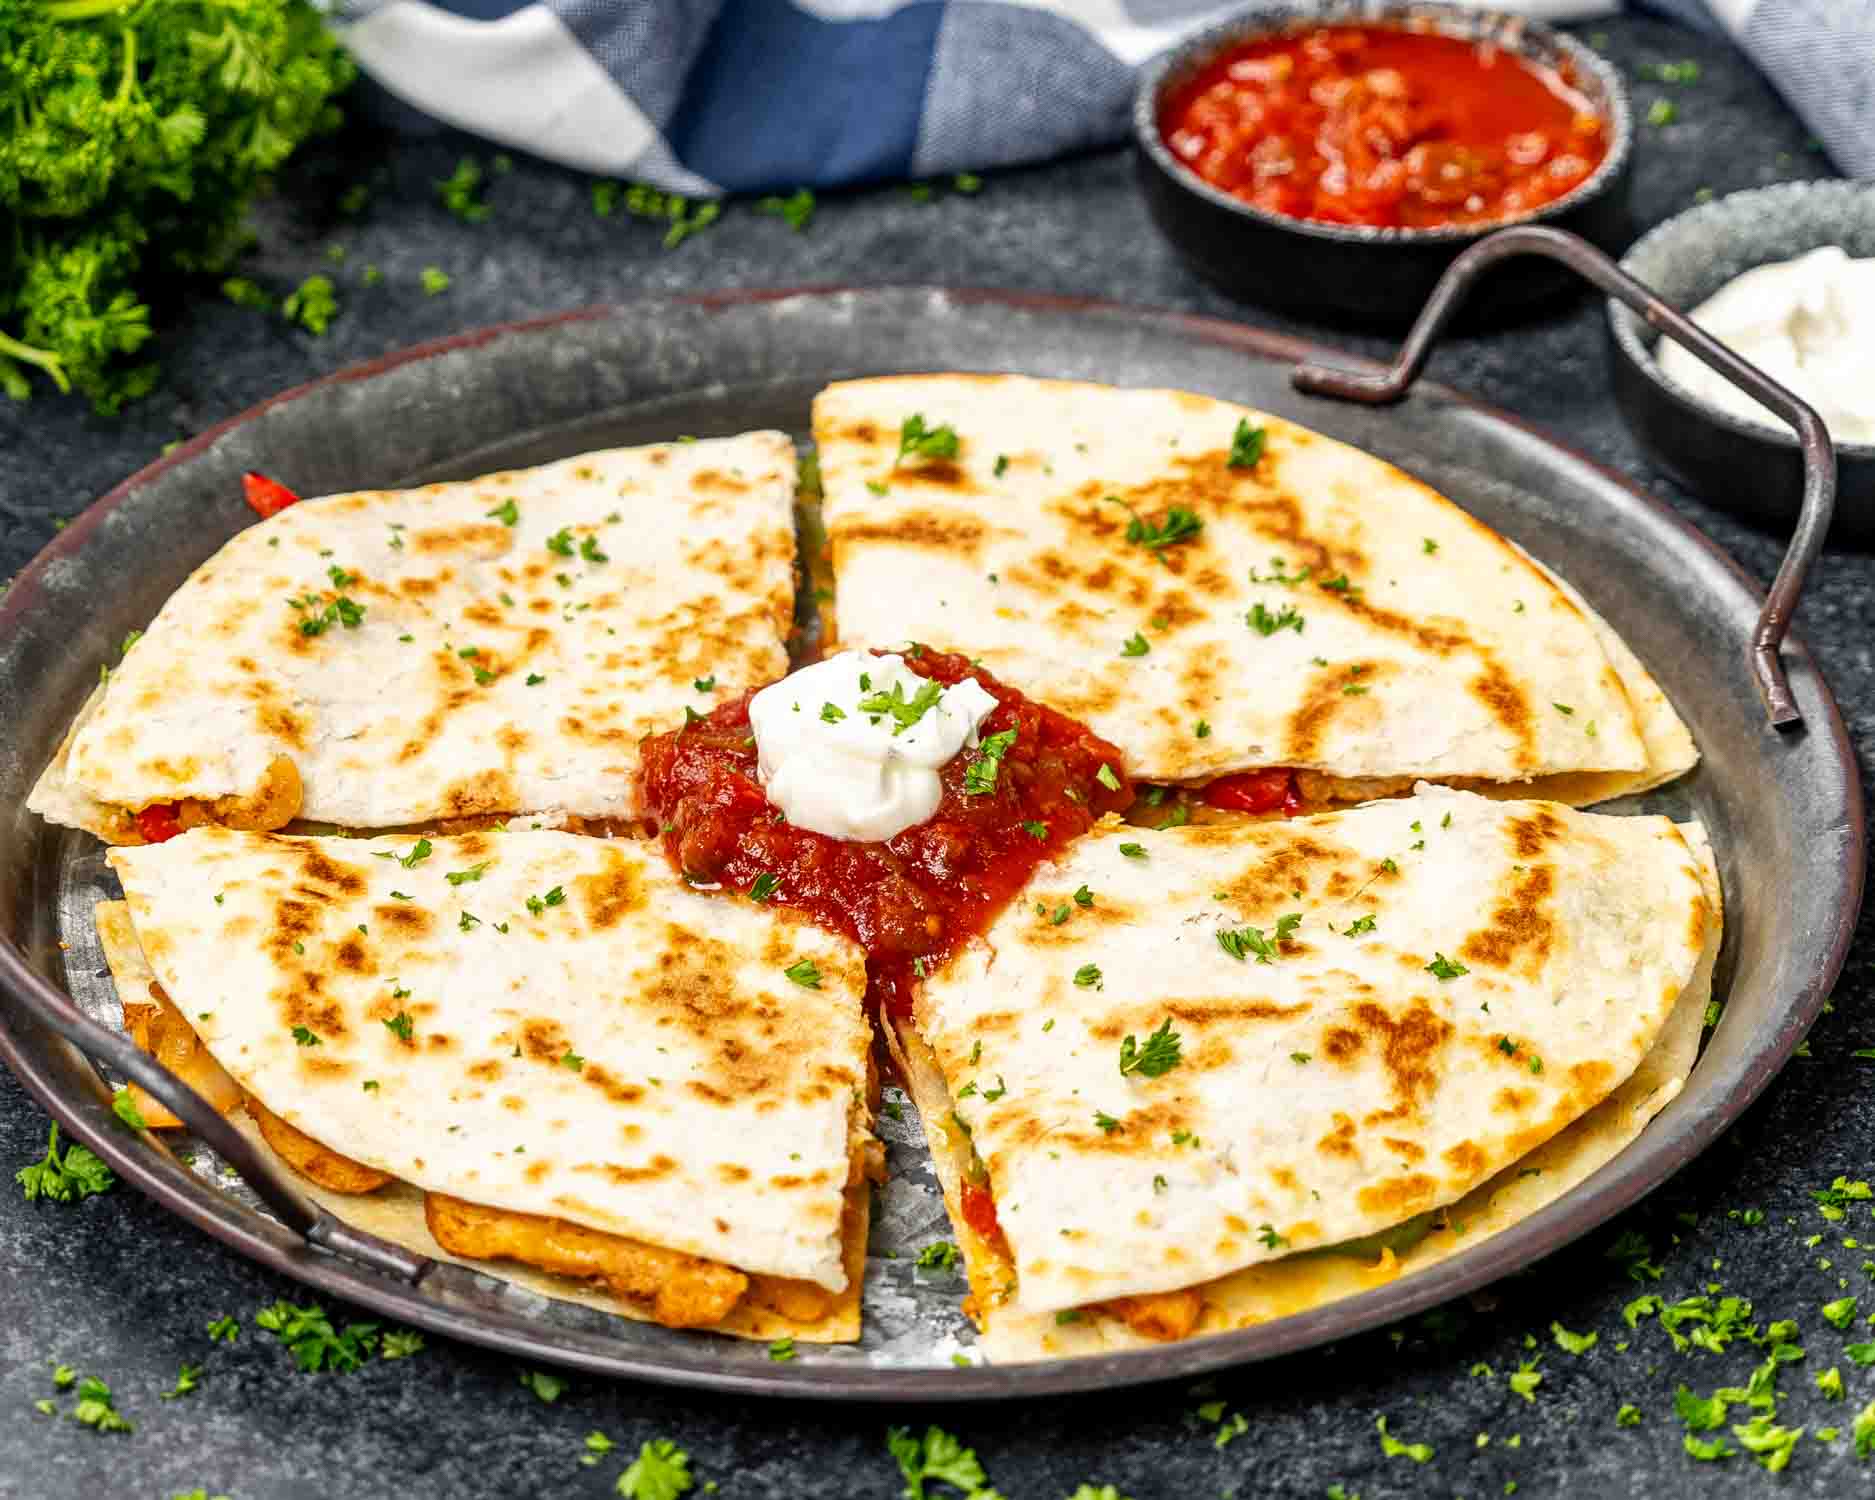 a stack of chicken fajita quesadillas with some salsa on a plate and garnished with parsley.